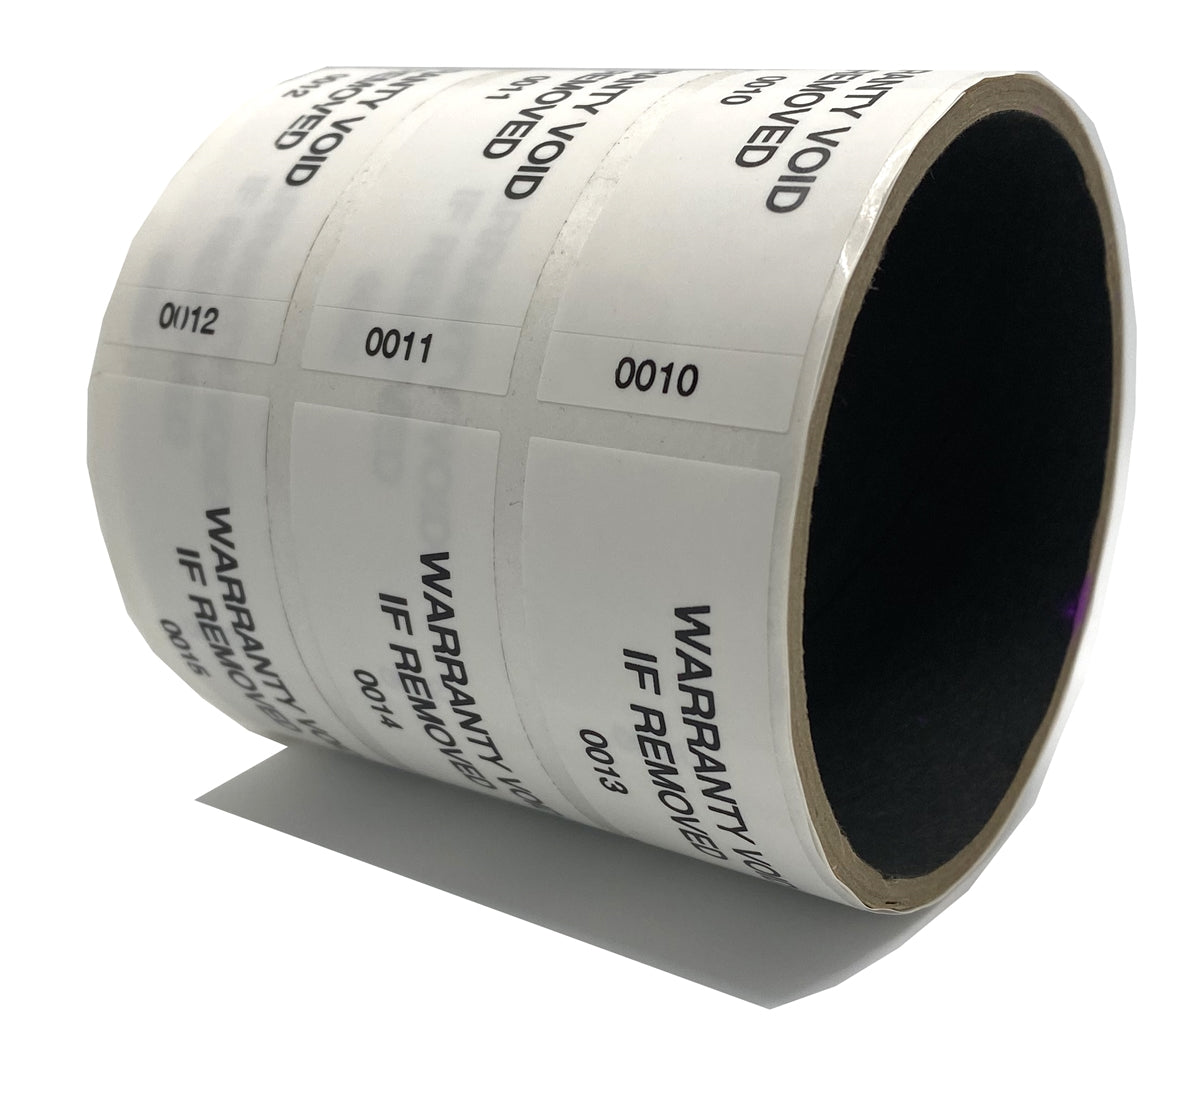 5,000 Tamper Evident White Non Residue Security Labels TamperGuard® Seal Sticker, Rectangle 2.75" x 1" (70mm x 25mm). Printed: Warranty Void if Removed + Serialized